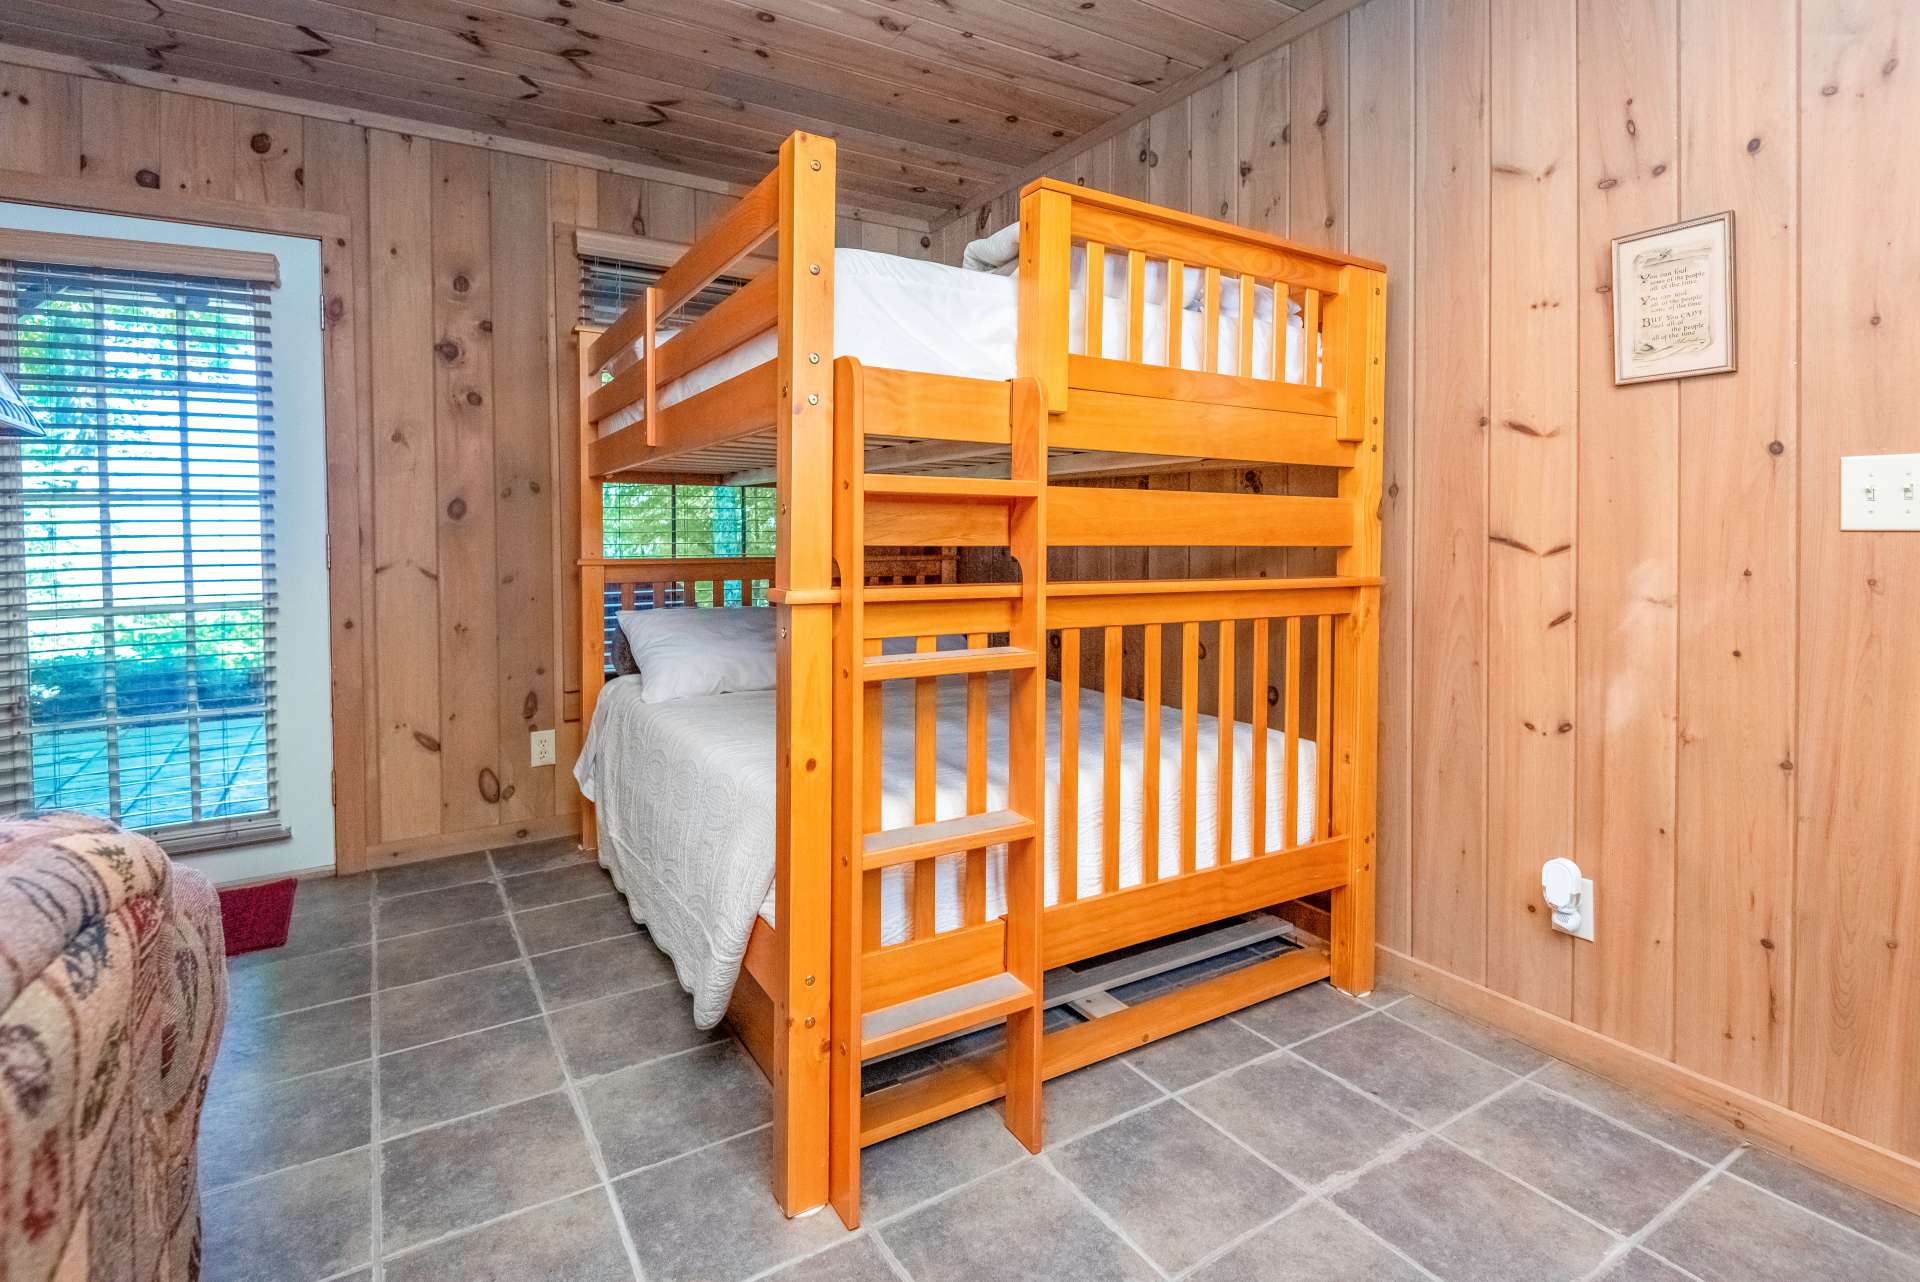 Family room, not only has a futon, but also a bunk bed for additional sleeping space for overnight guests.